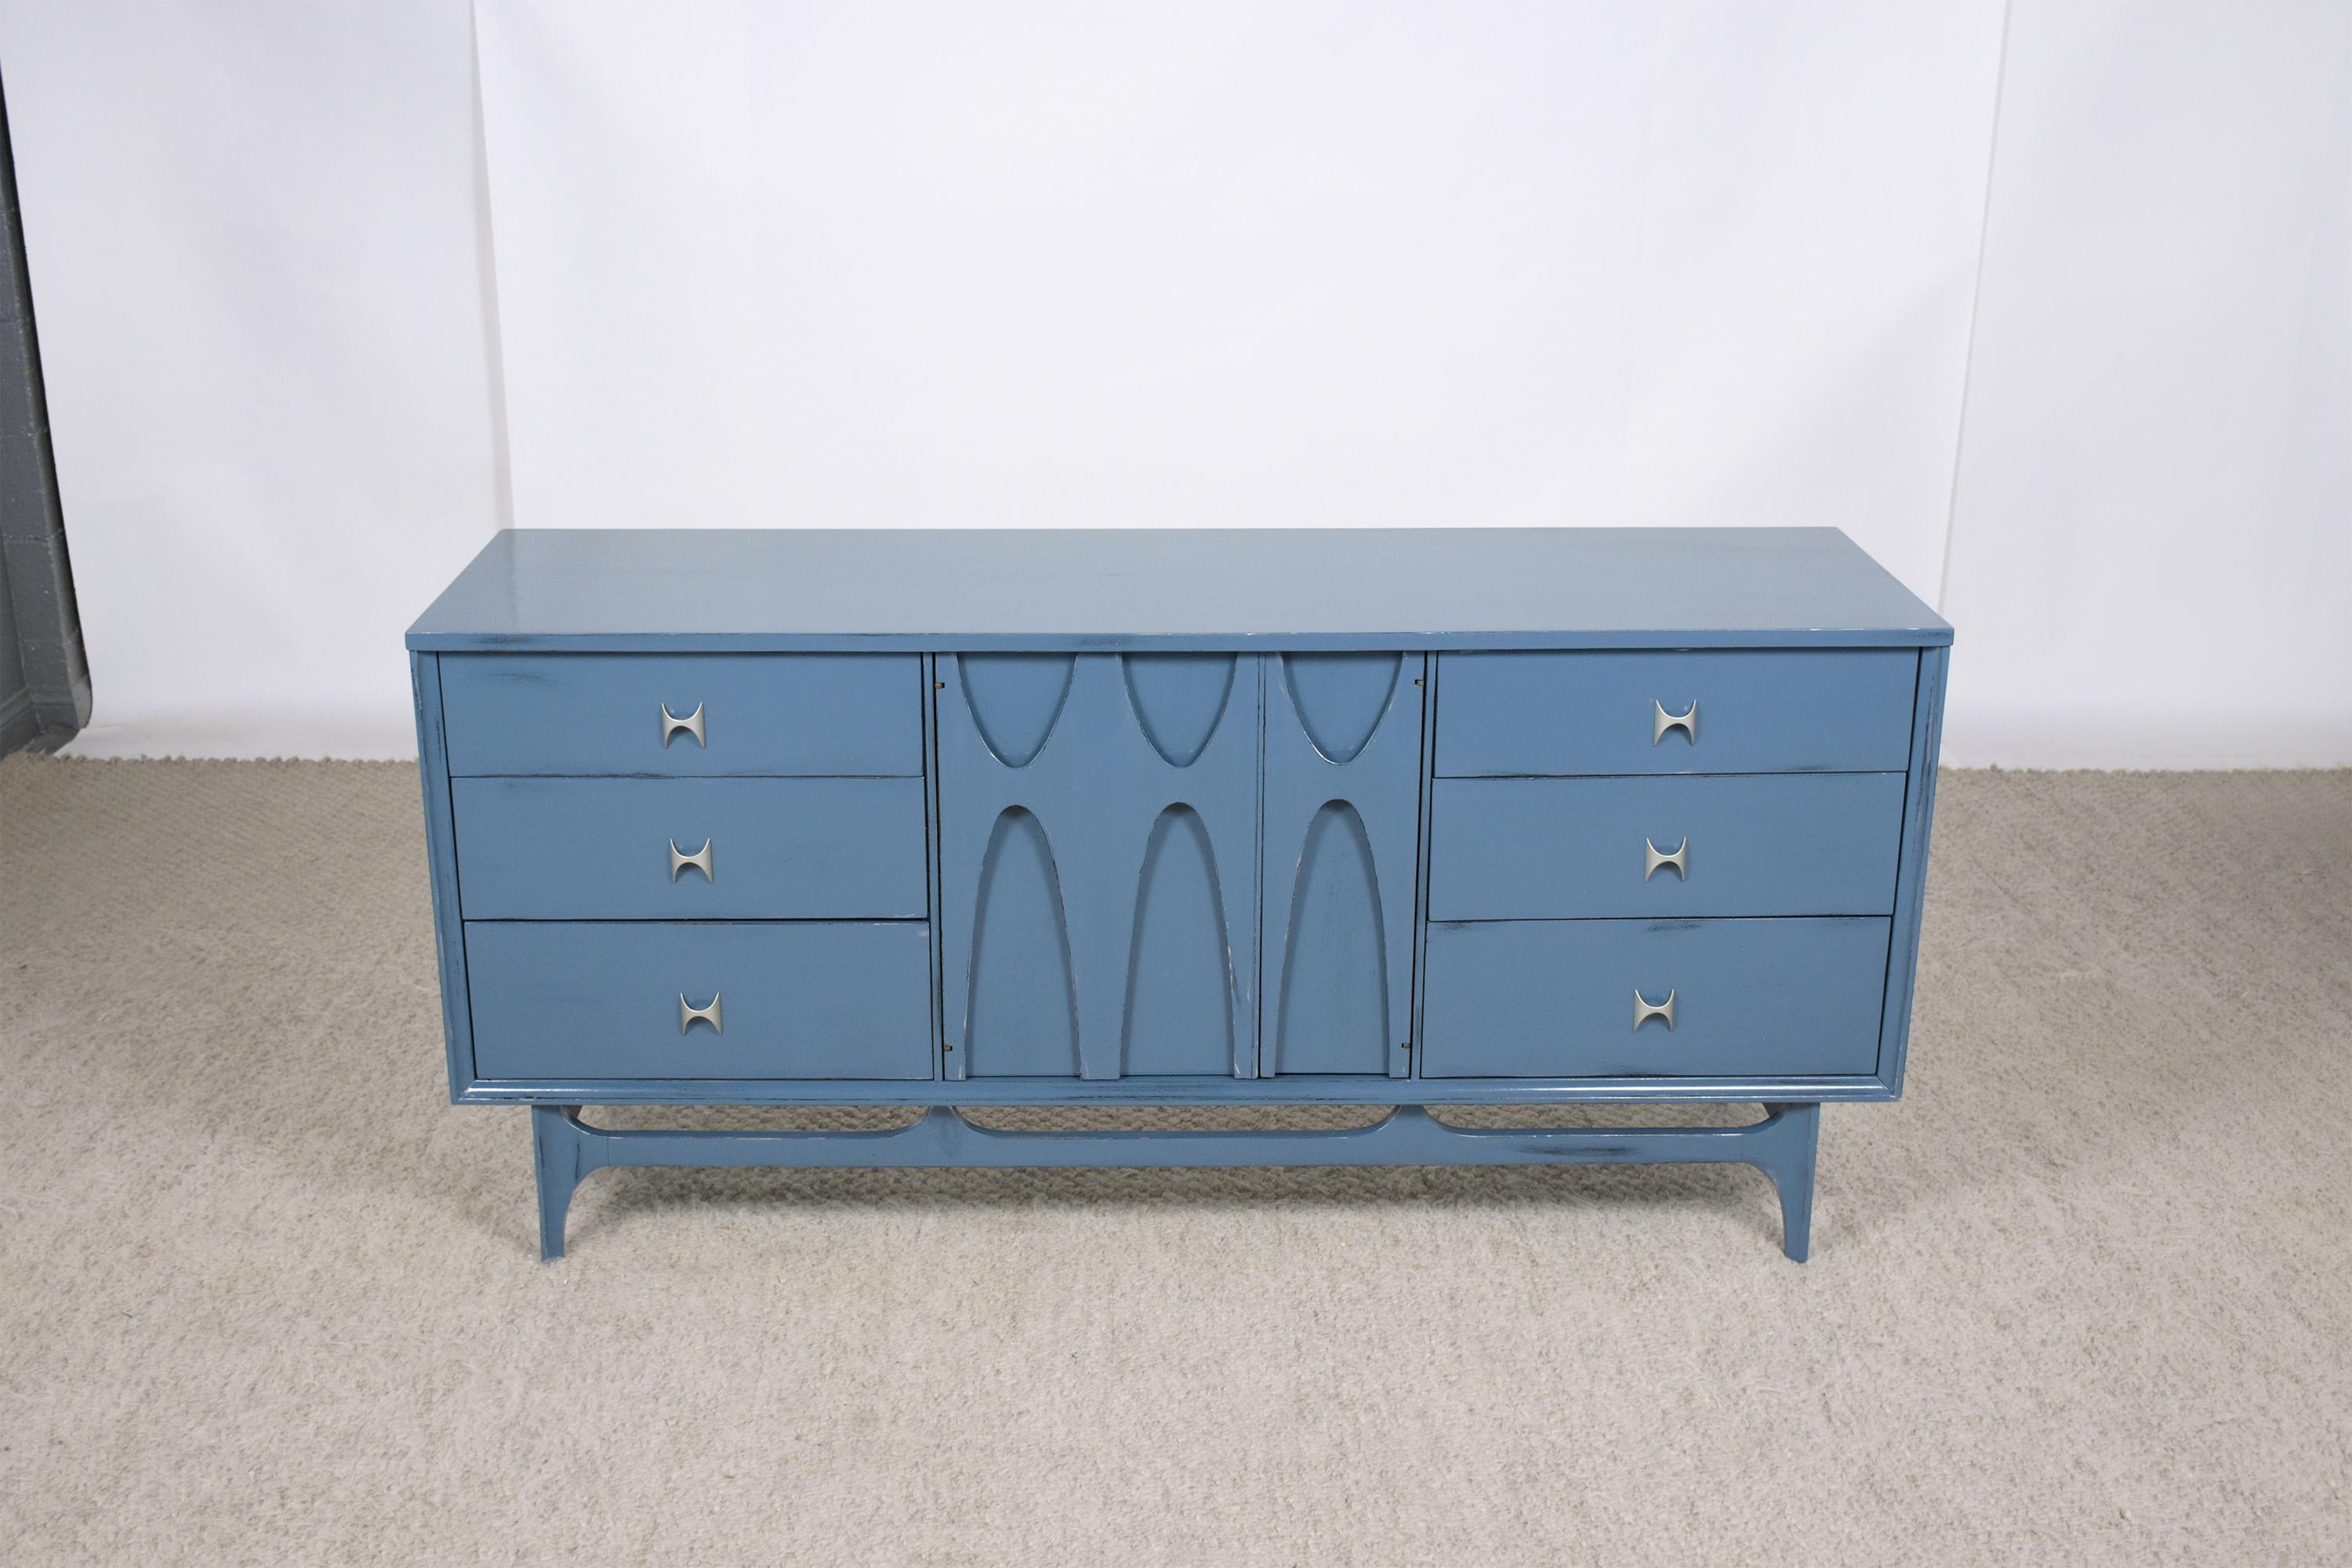 Step back into the stylish 1960s with our beautifully restored Broyhill Brasilia credenza, a hallmark of mid-century modern design. This vintage piece has been hand-crafted with precision and care, then given new life by our team of expert craftsmen